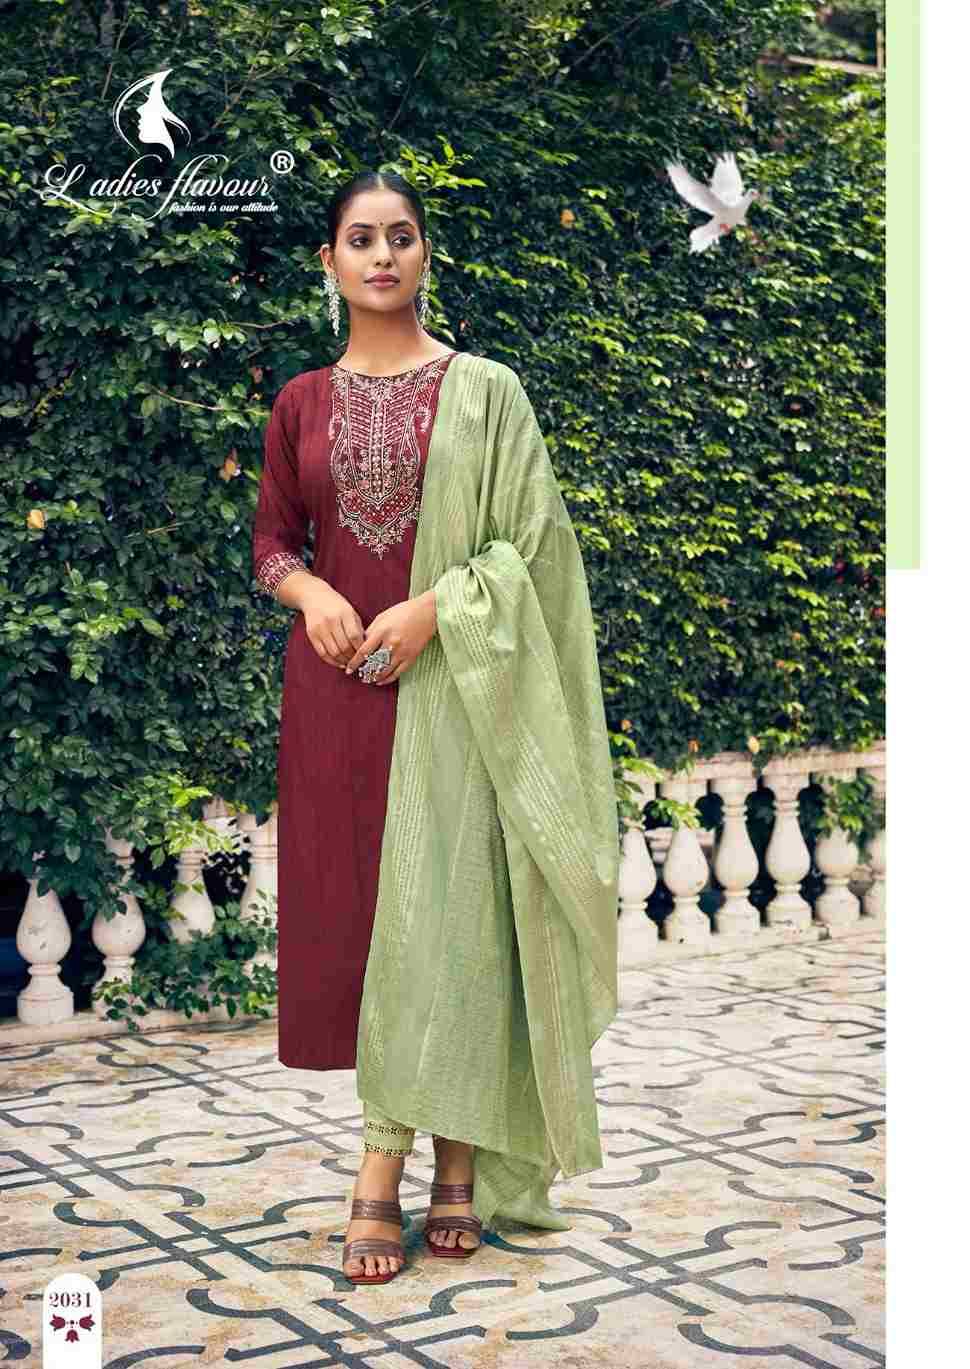 Parampara Vol-2 By Ladies Flavour 2031 To 2036 Series Beautiful Festive Suits Colorful Stylish Fancy Casual Wear & Ethnic Wear Chinnon Dresses At Wholesale Price